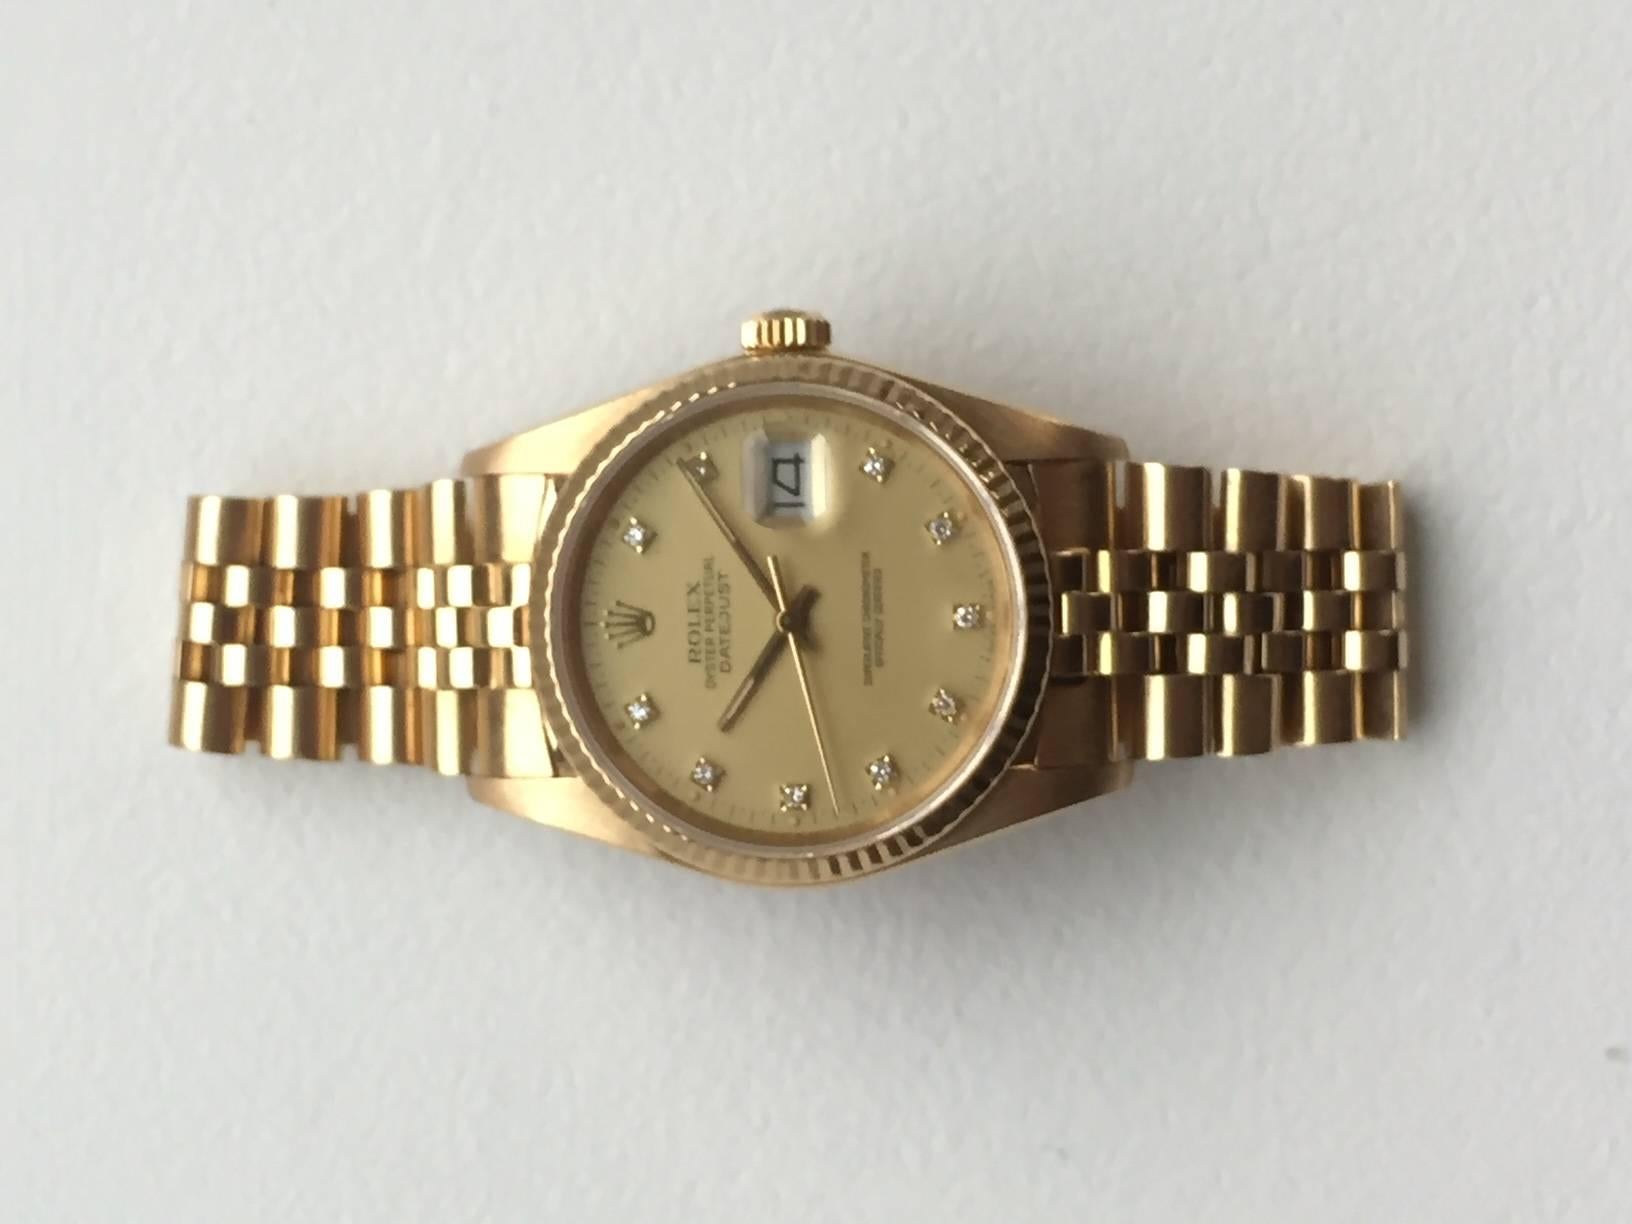 Rolex 18K Yellow Gold Oyster Perpetual Factory Diamond Dial Datejust Watch 1